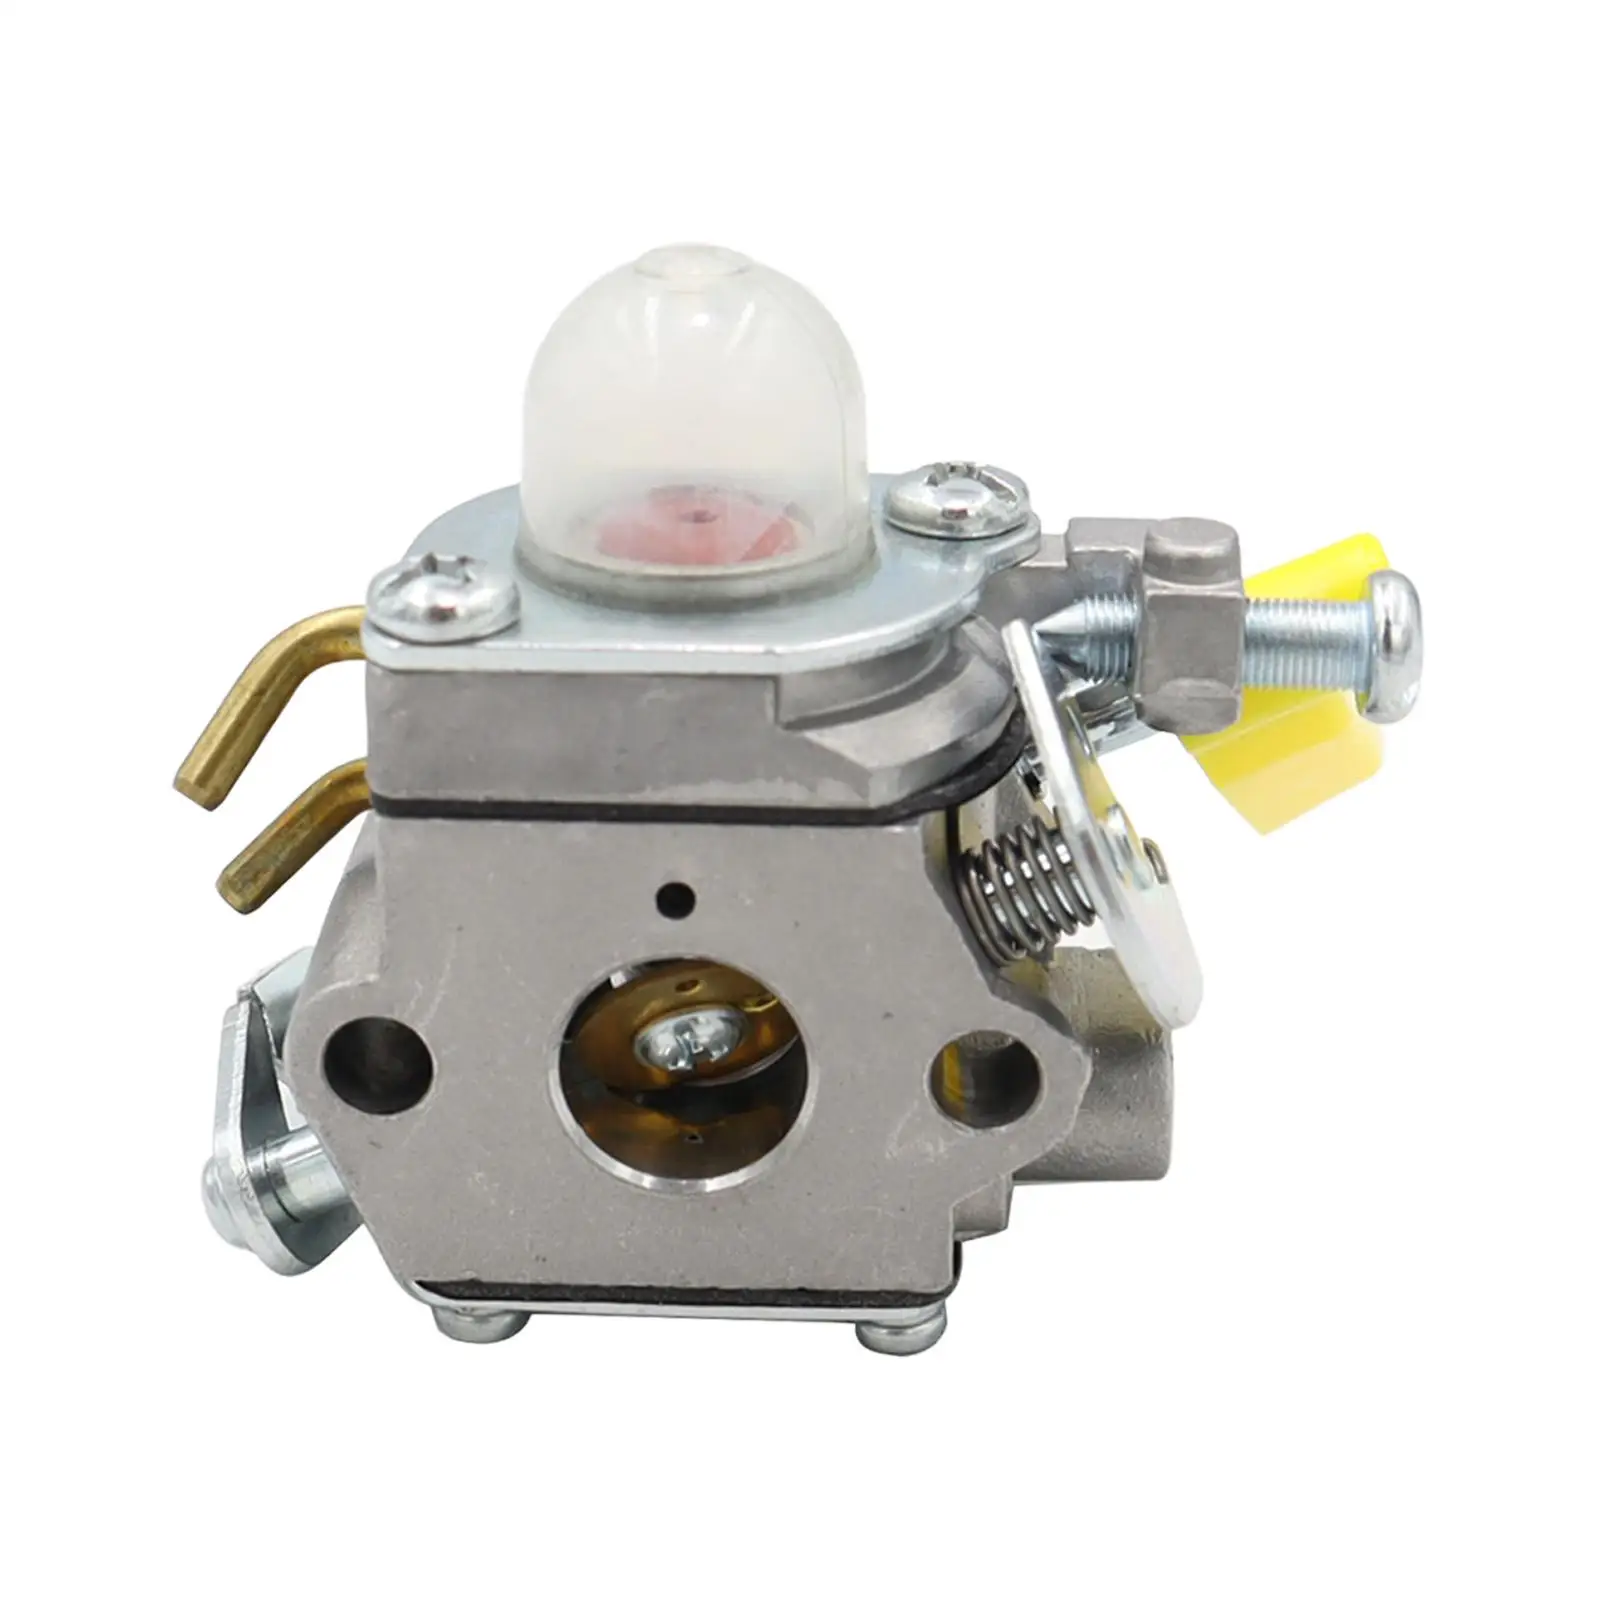 Carburetor Kit Accessory Easy to Install Engines Carburetor Sturdy Parts Replace for 26cc 30cc 25cc Chainsaw Backpack Blower